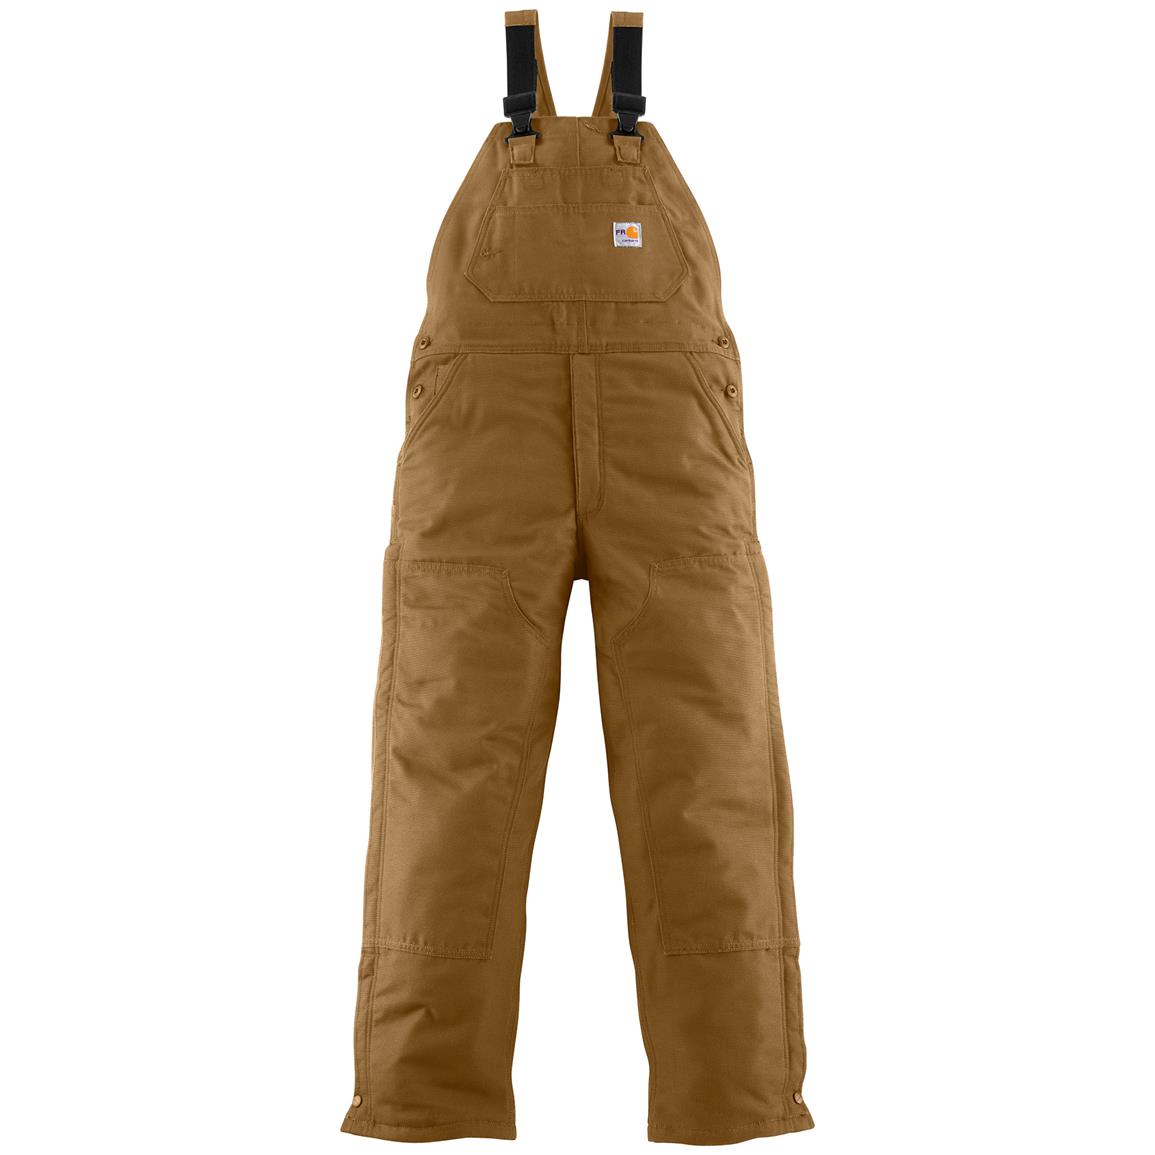 Carhartt Flame-resistant Quilt-lined Bib Overalls - 637612, Insulated